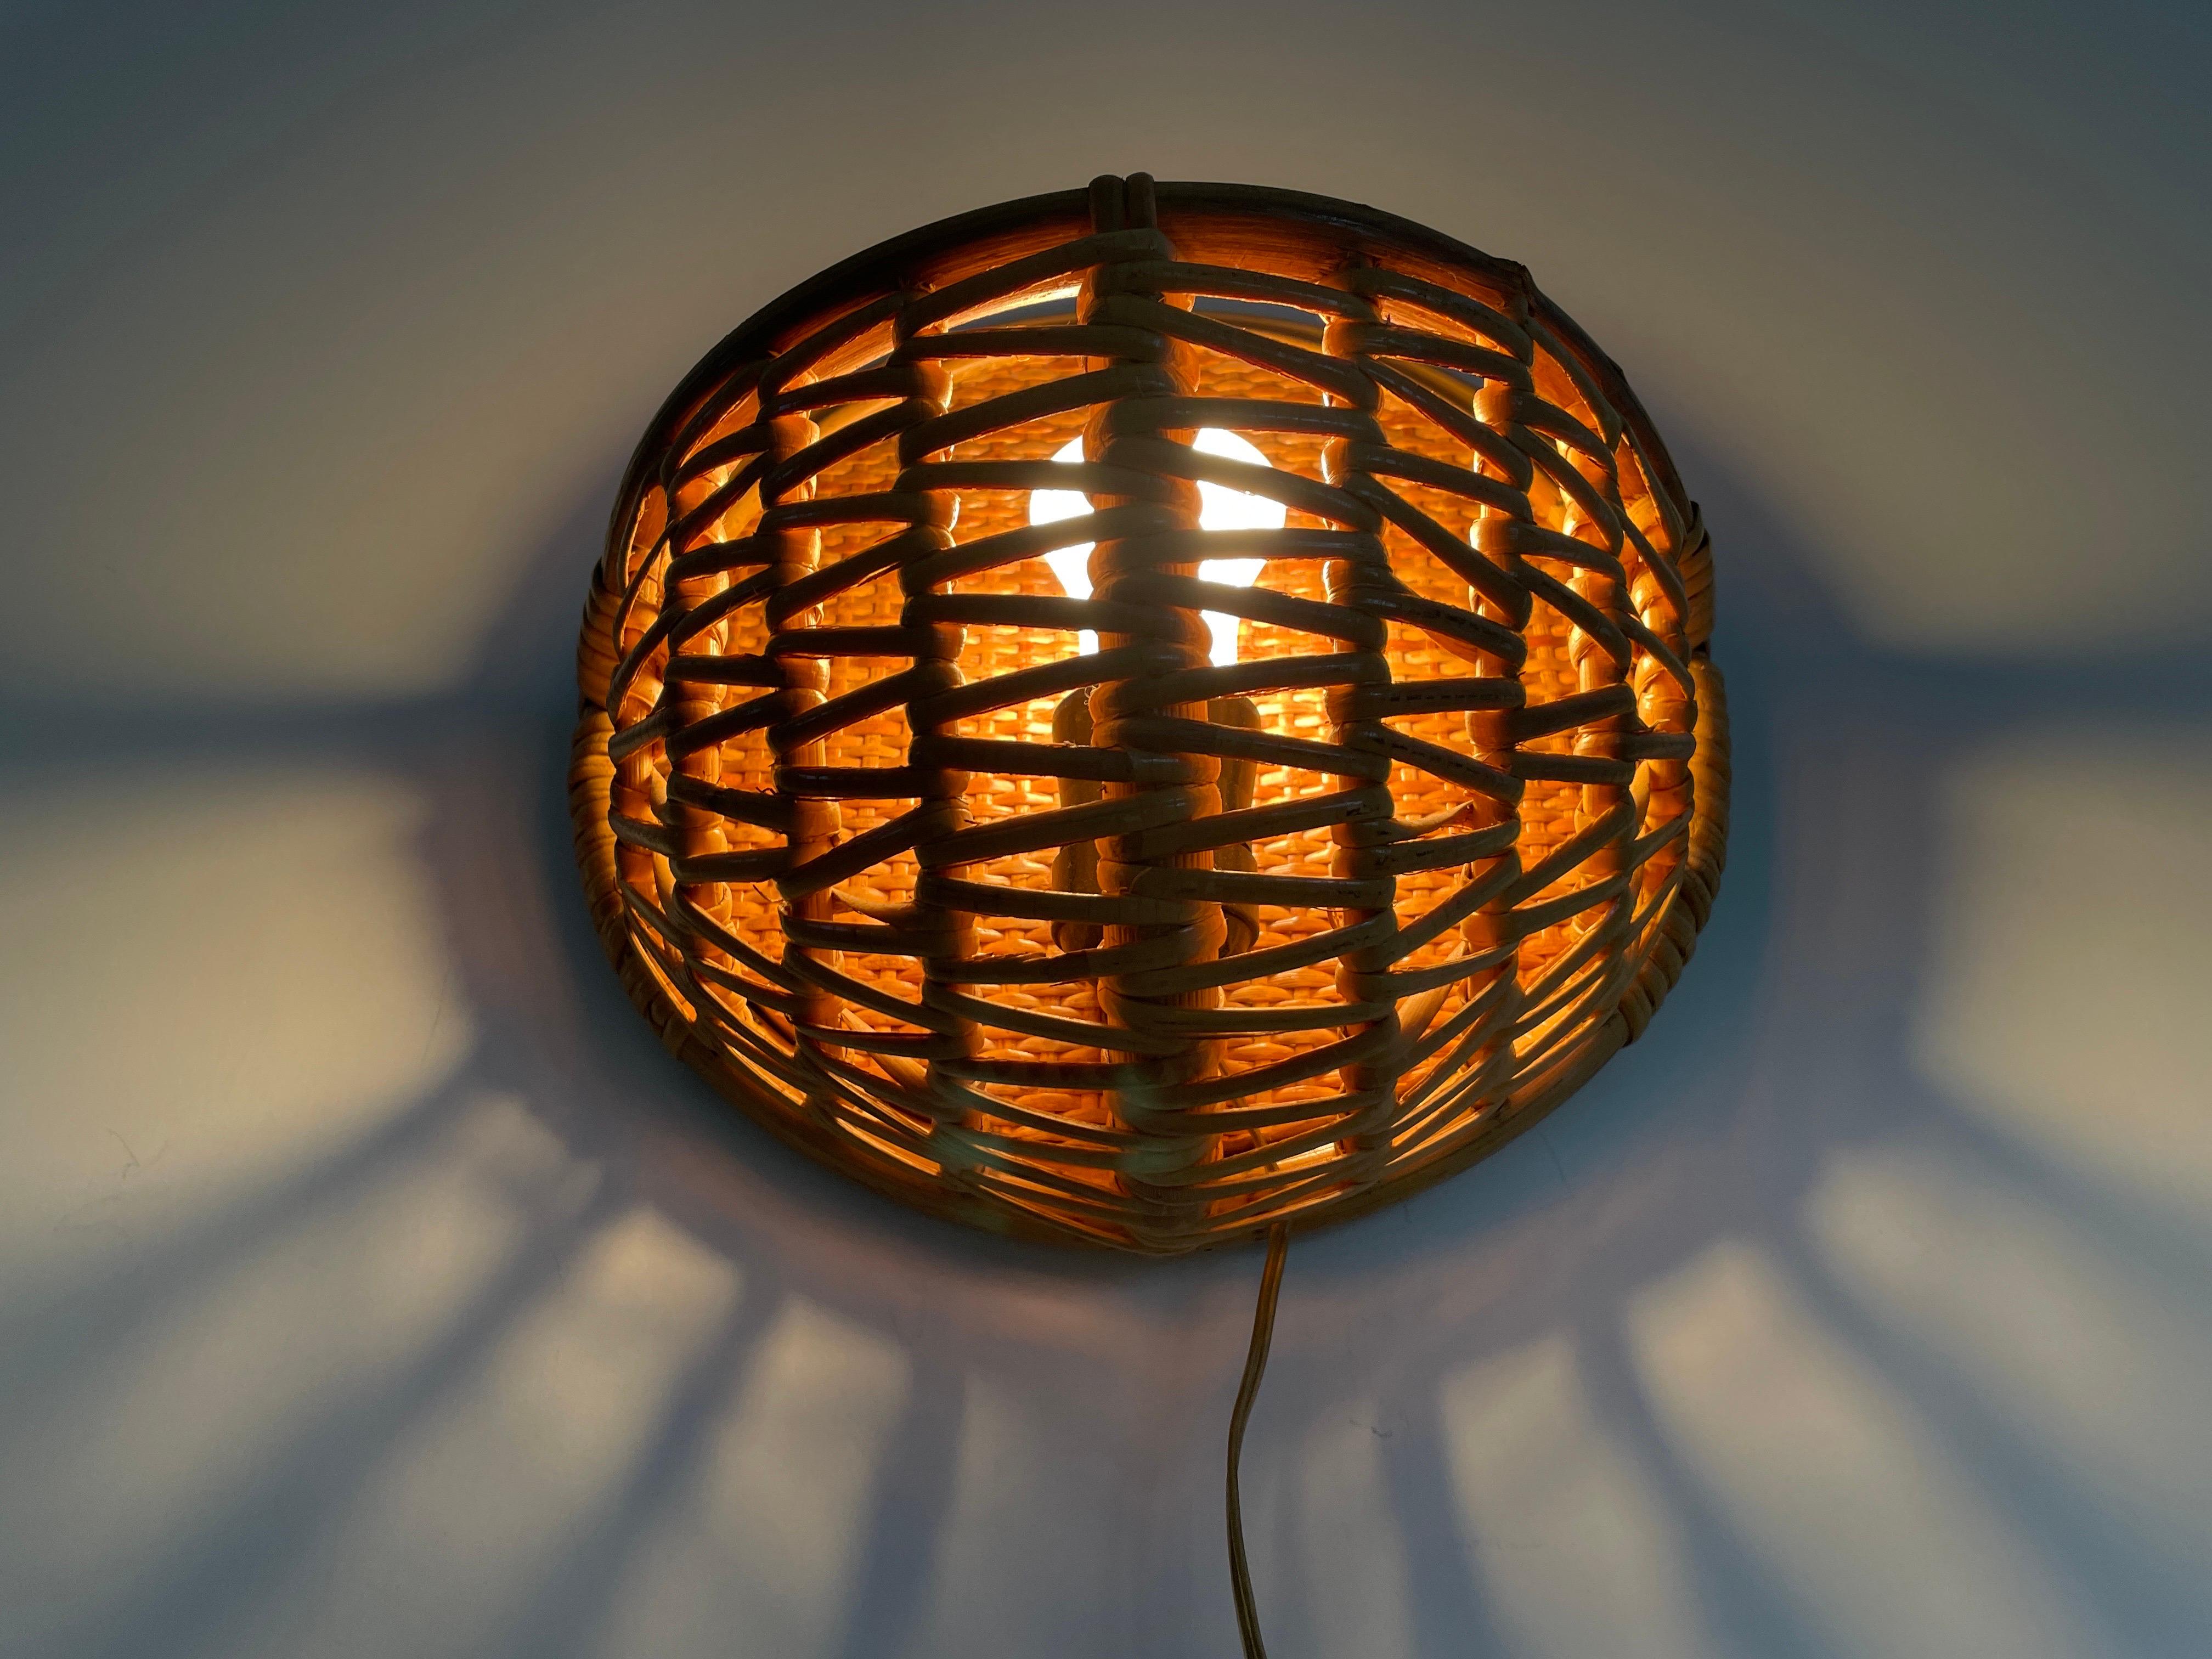 Wicker and Bamboo Round Design Pair of Wall Lamps, 1950s, Italy For Sale 12